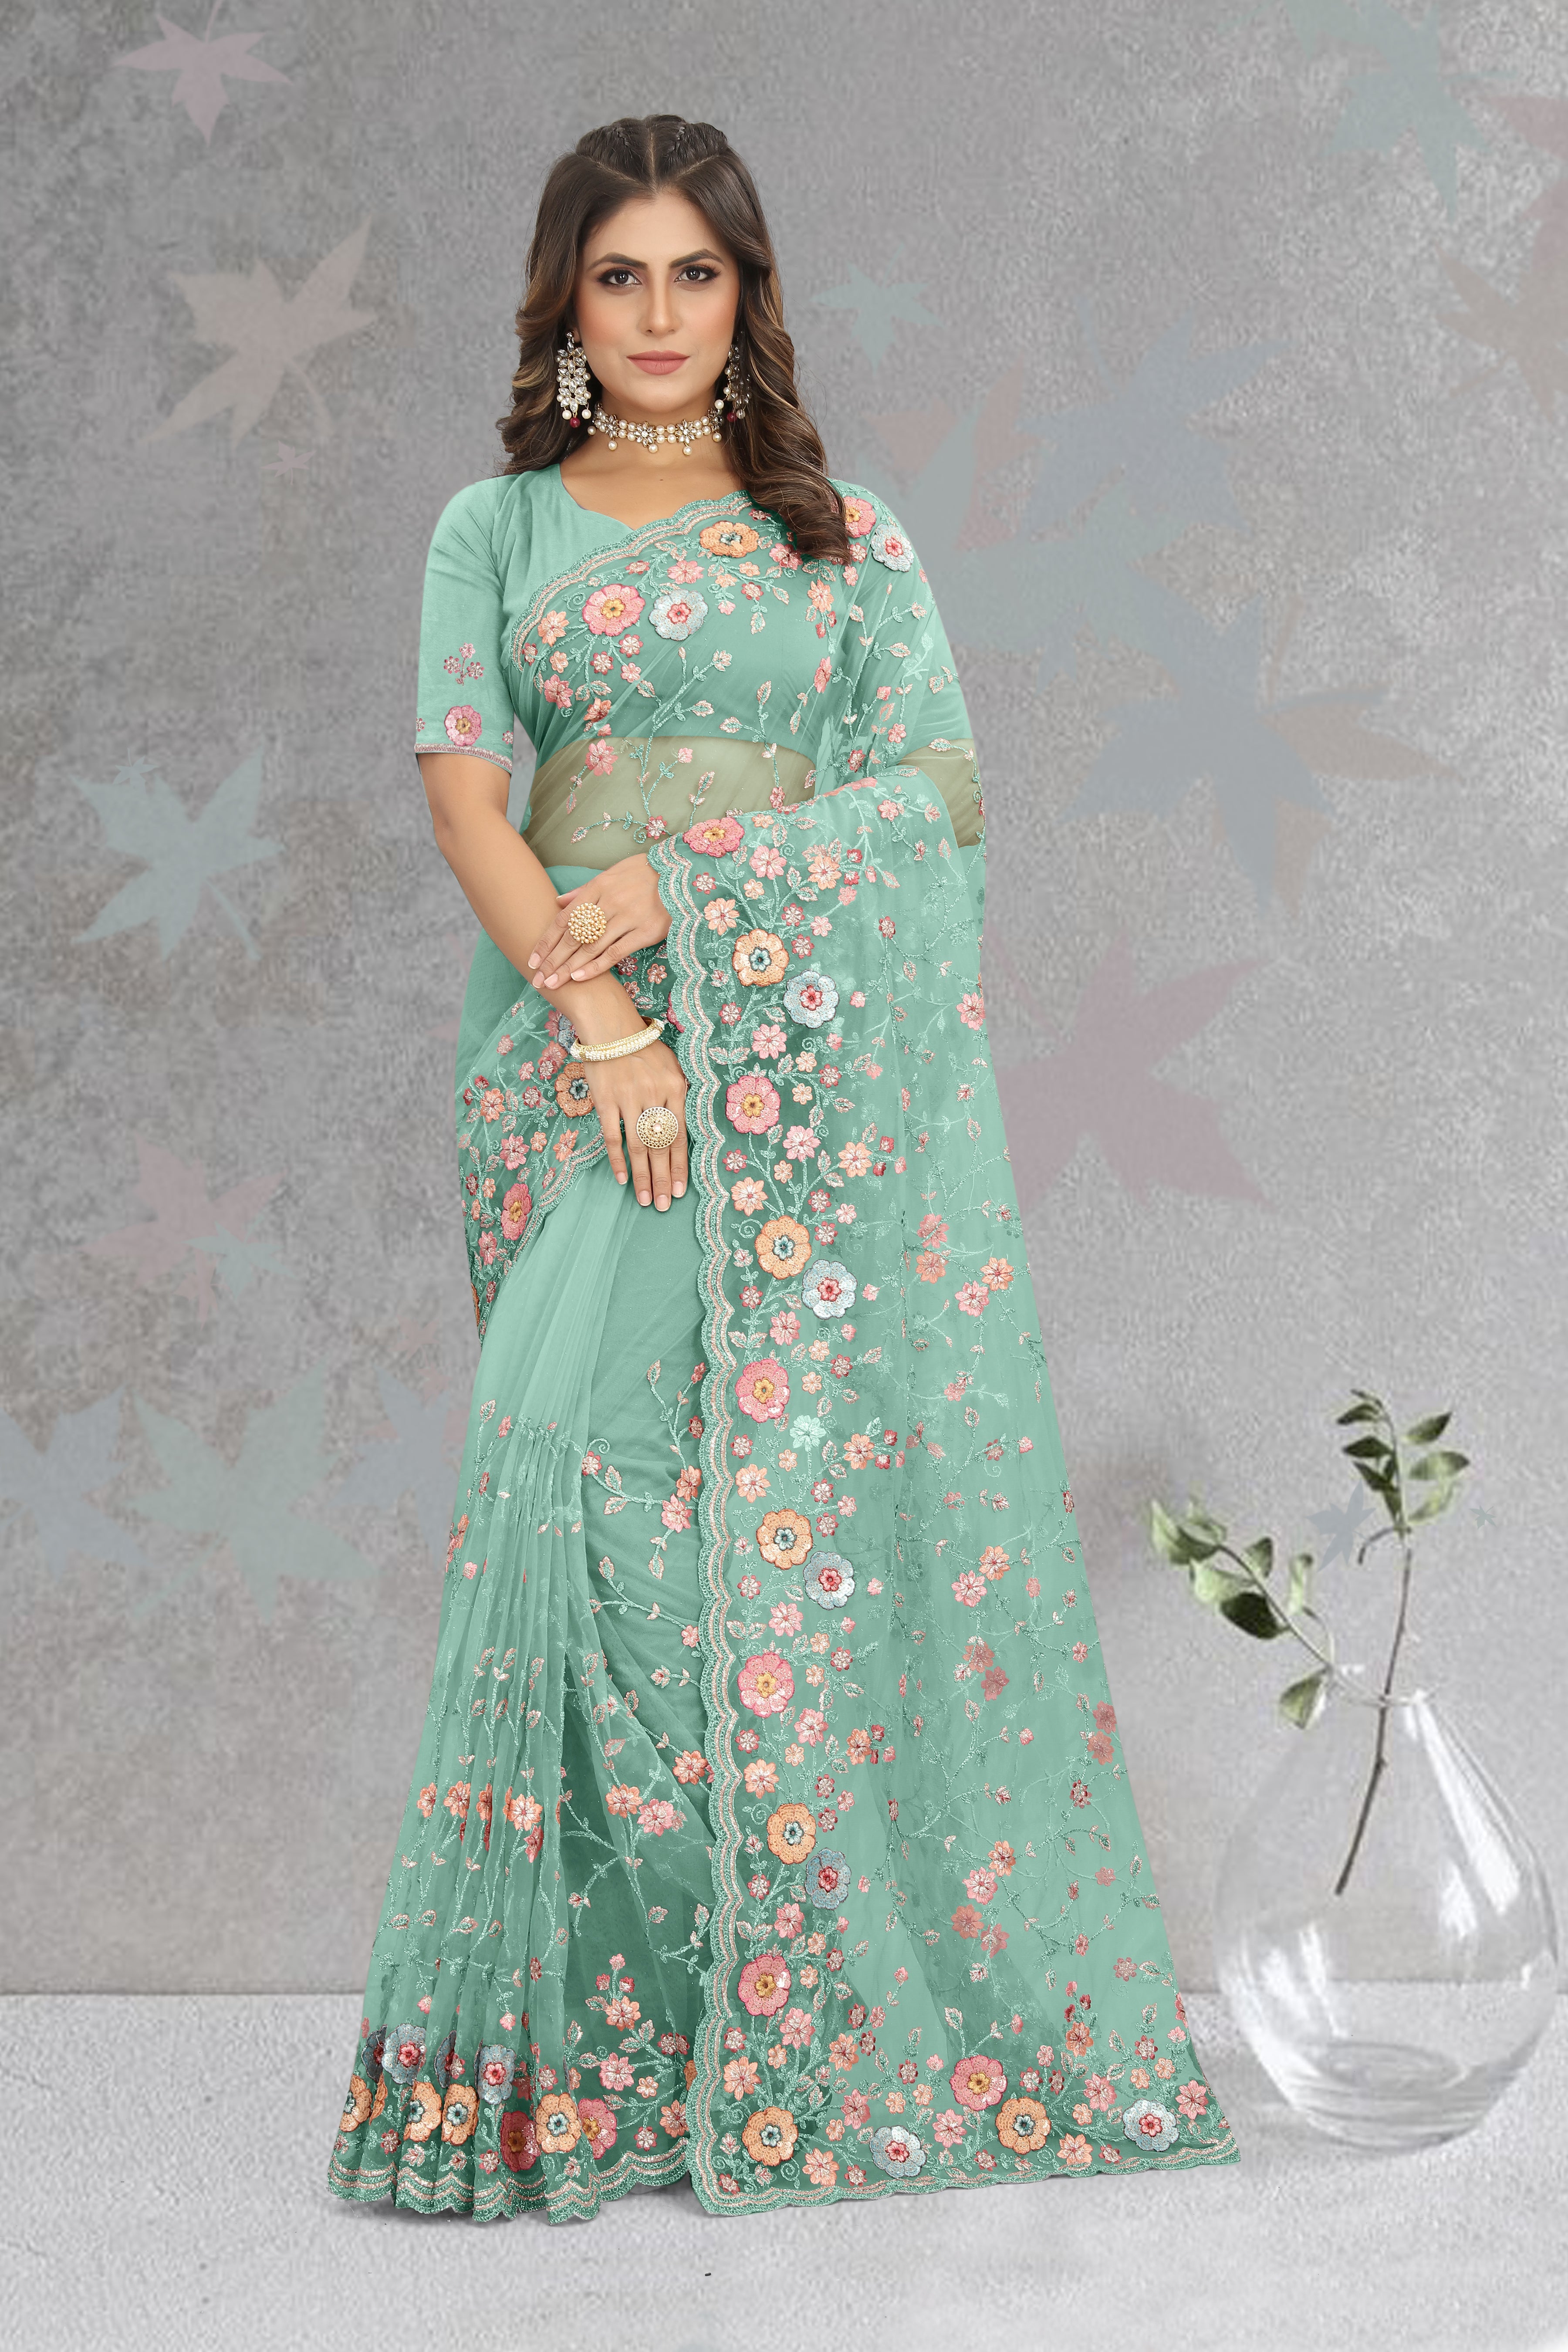 Sky Blue Saree with Resham, Sequin Embroidery & Butta Work, Perfect for Parties and Weddings